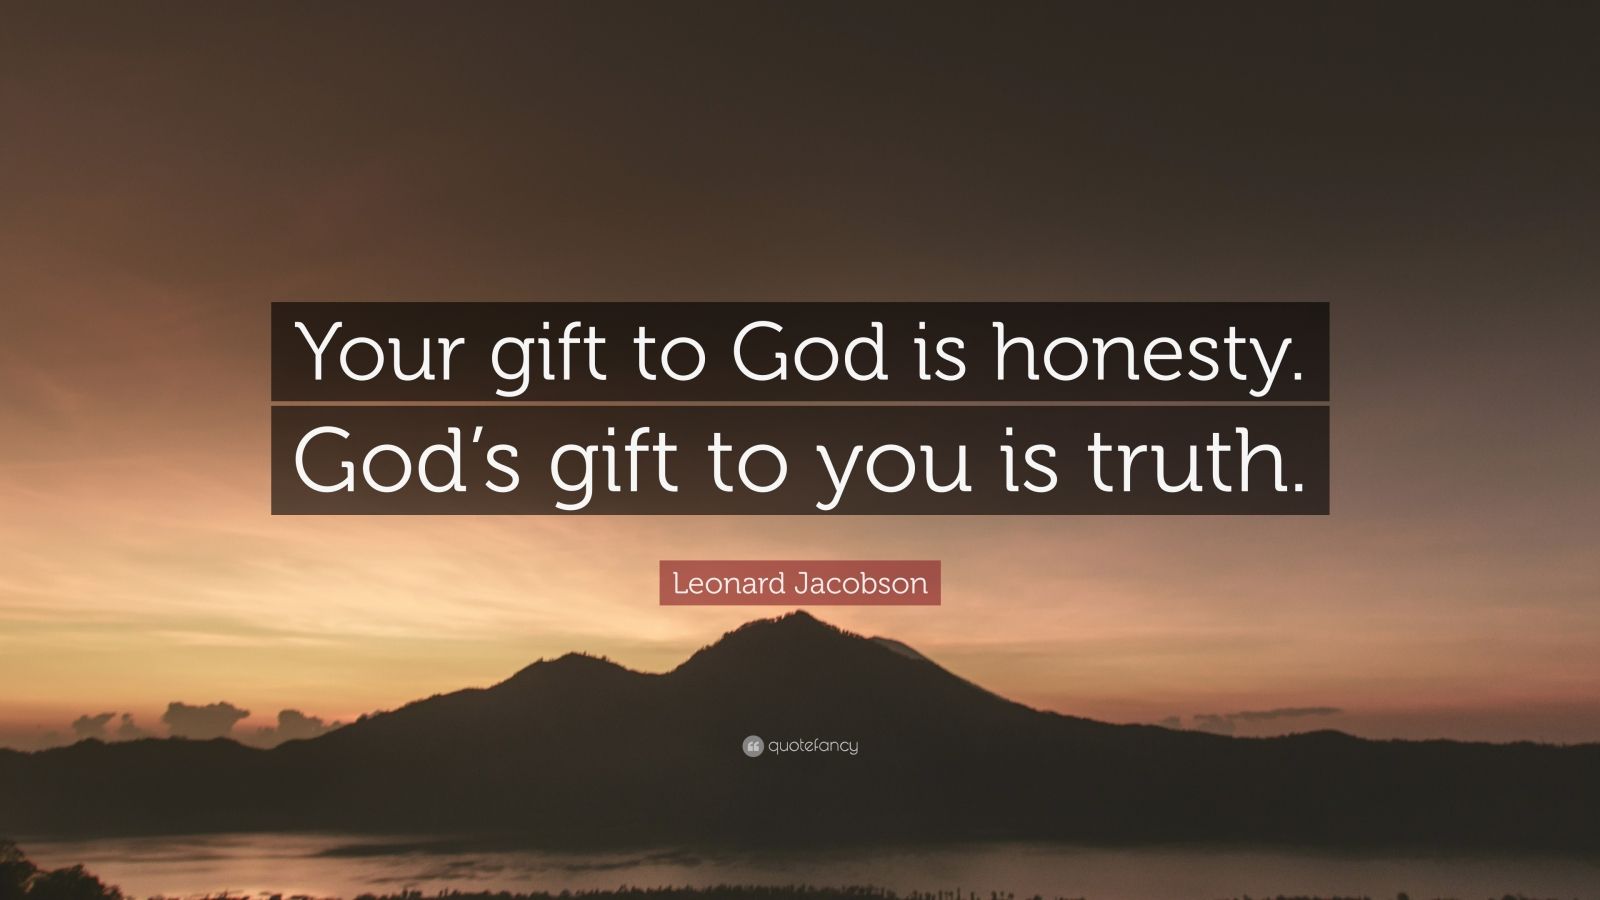 2653494 Leonard Jacobson Quote Your gift to God is honesty God s gift to